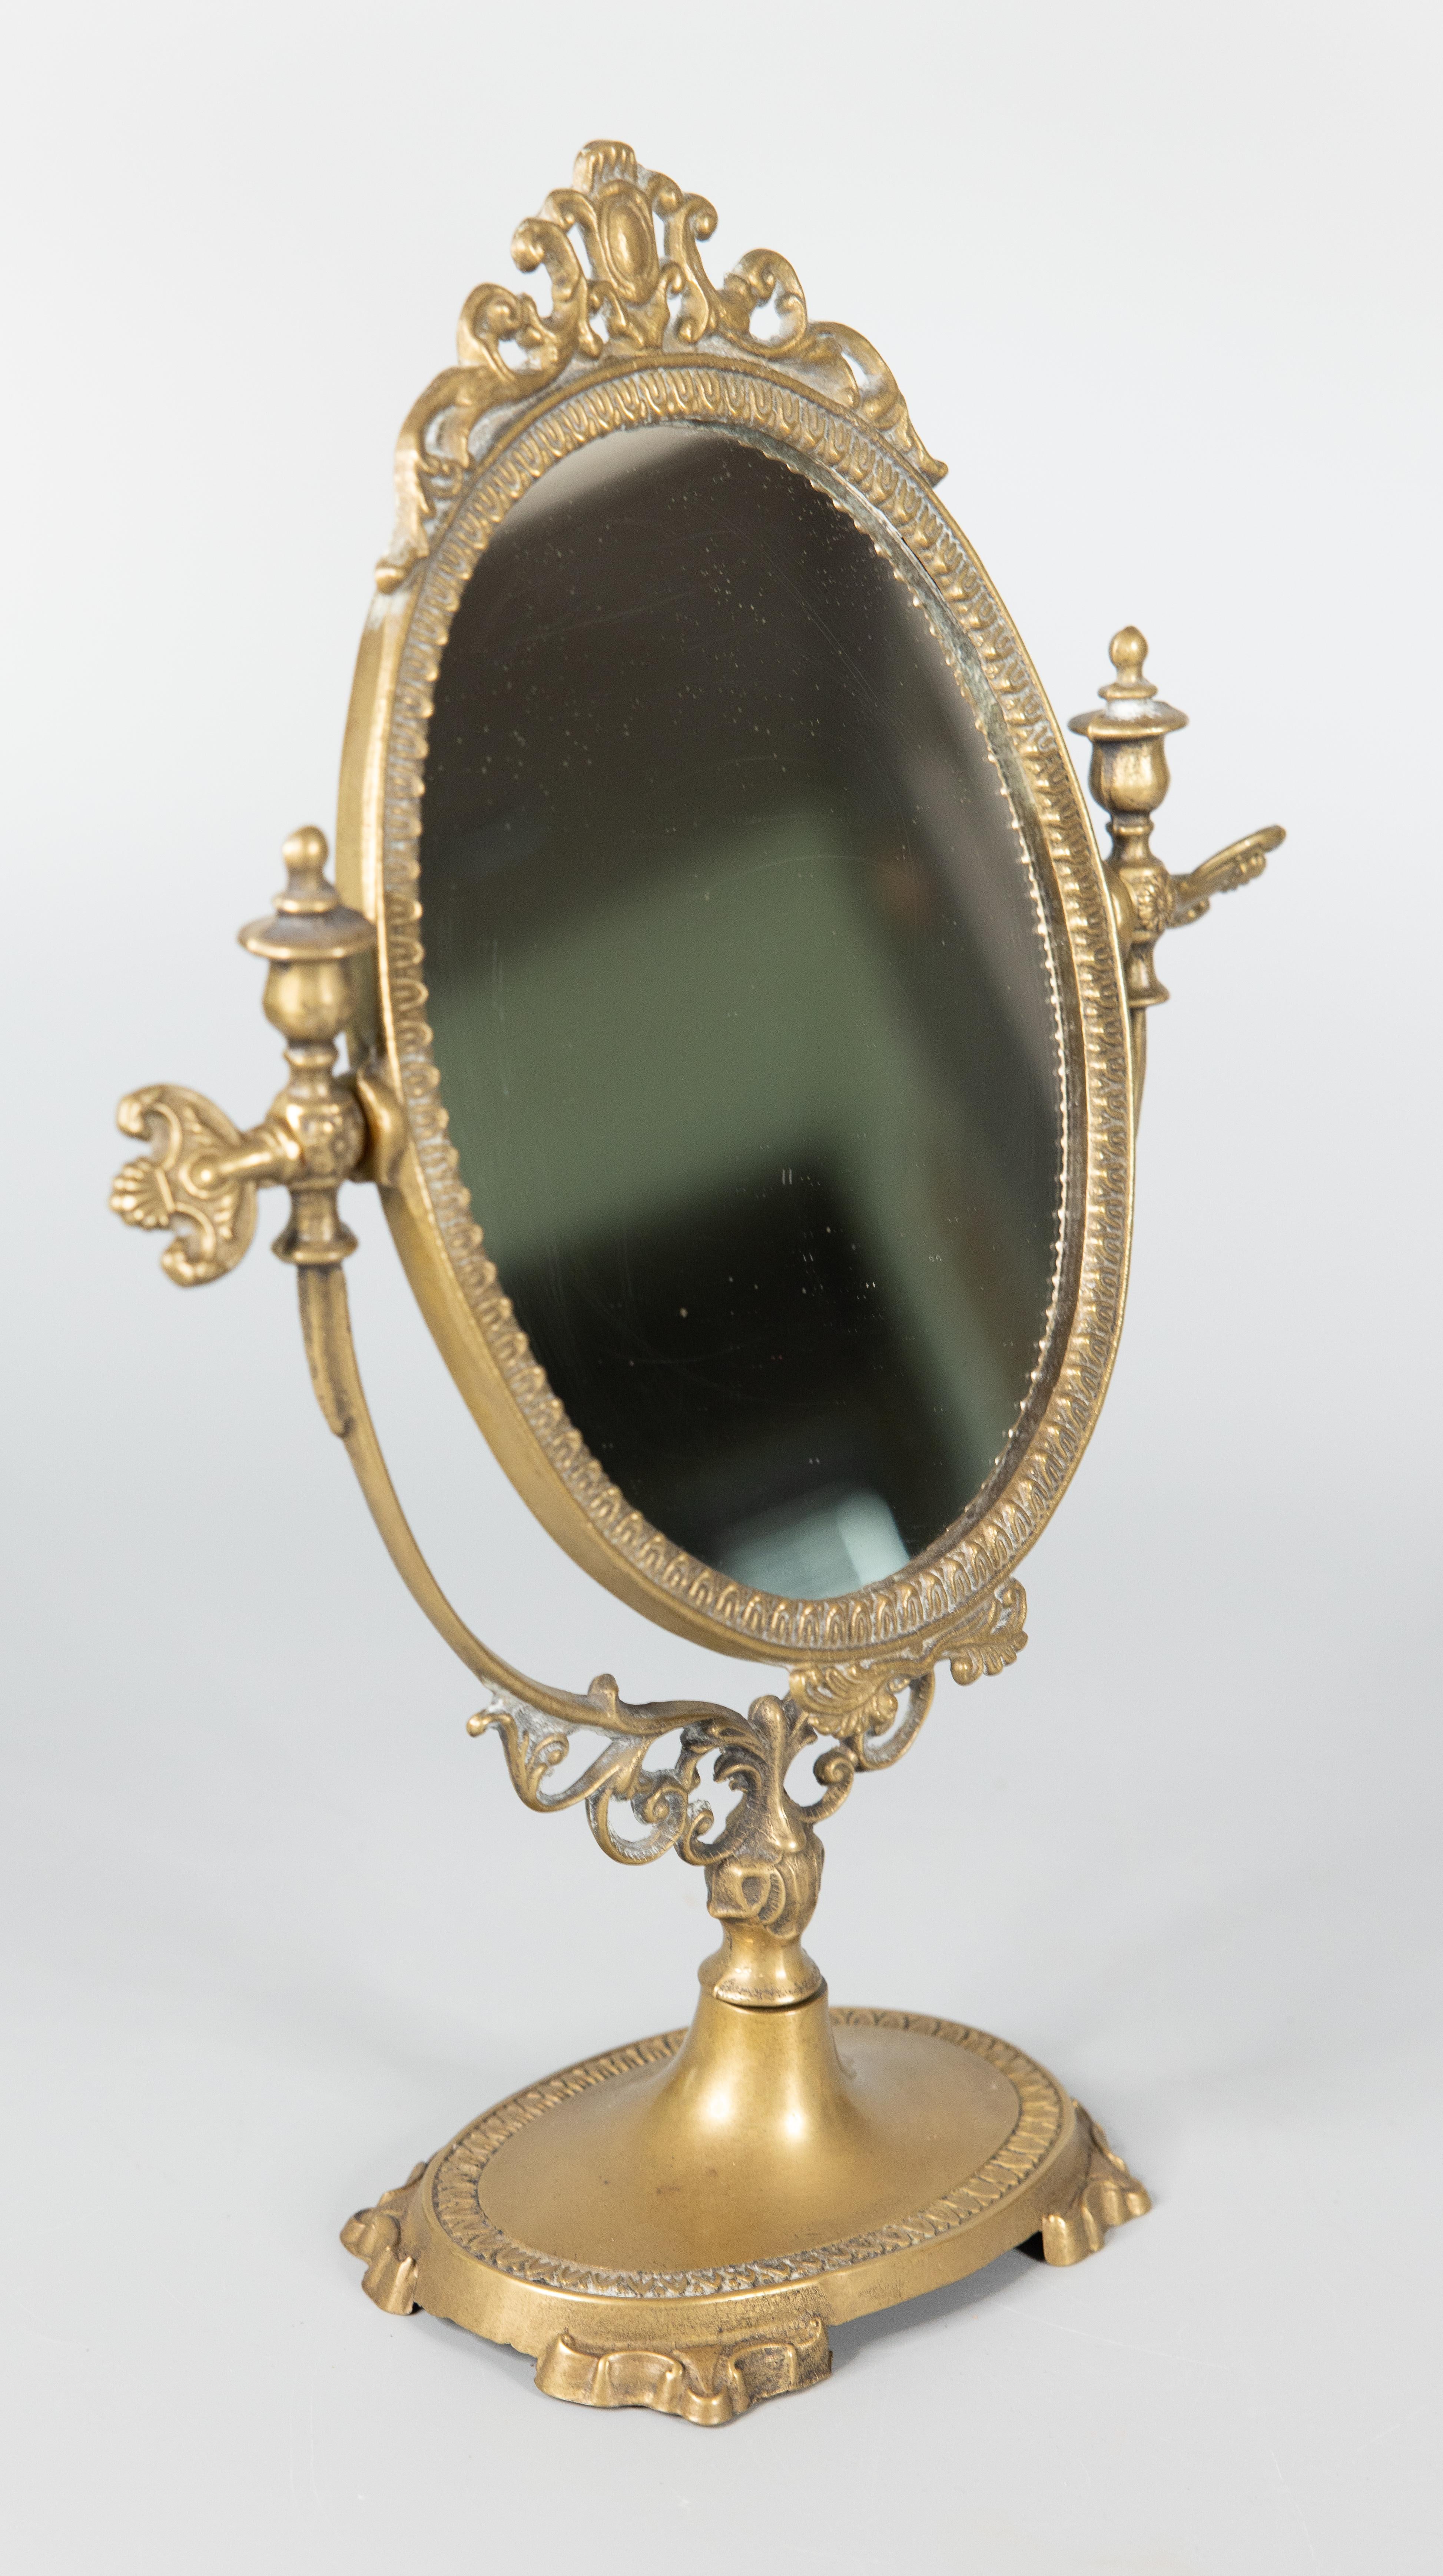 A gorgeous antique French Rococo style gilded bronze dressing tabletop swivel mirror with ornate knobs to adjust the angle, circa 1900. This would look fabulous displayed on a dresser or bathroom vanity.